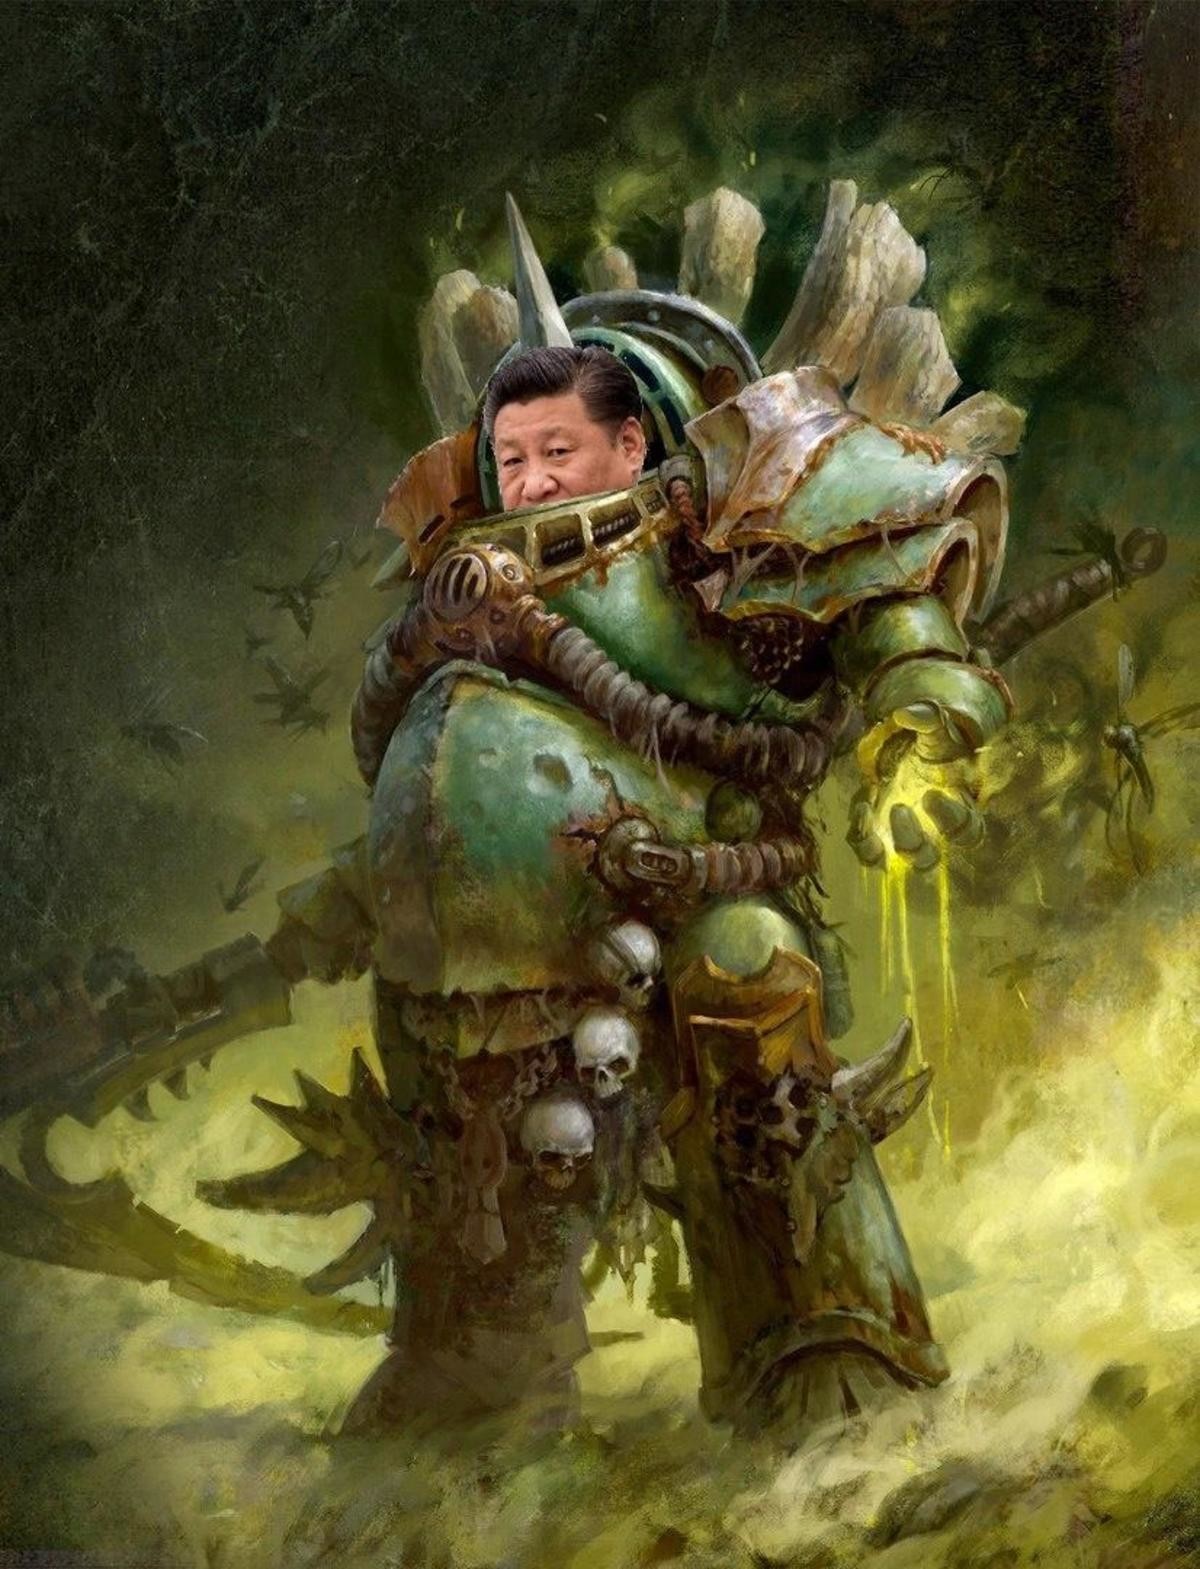 Typhus the chinese. .. When the Chinese government finds a way to bring back the dead and decides to conquer the world with an army of zombies.